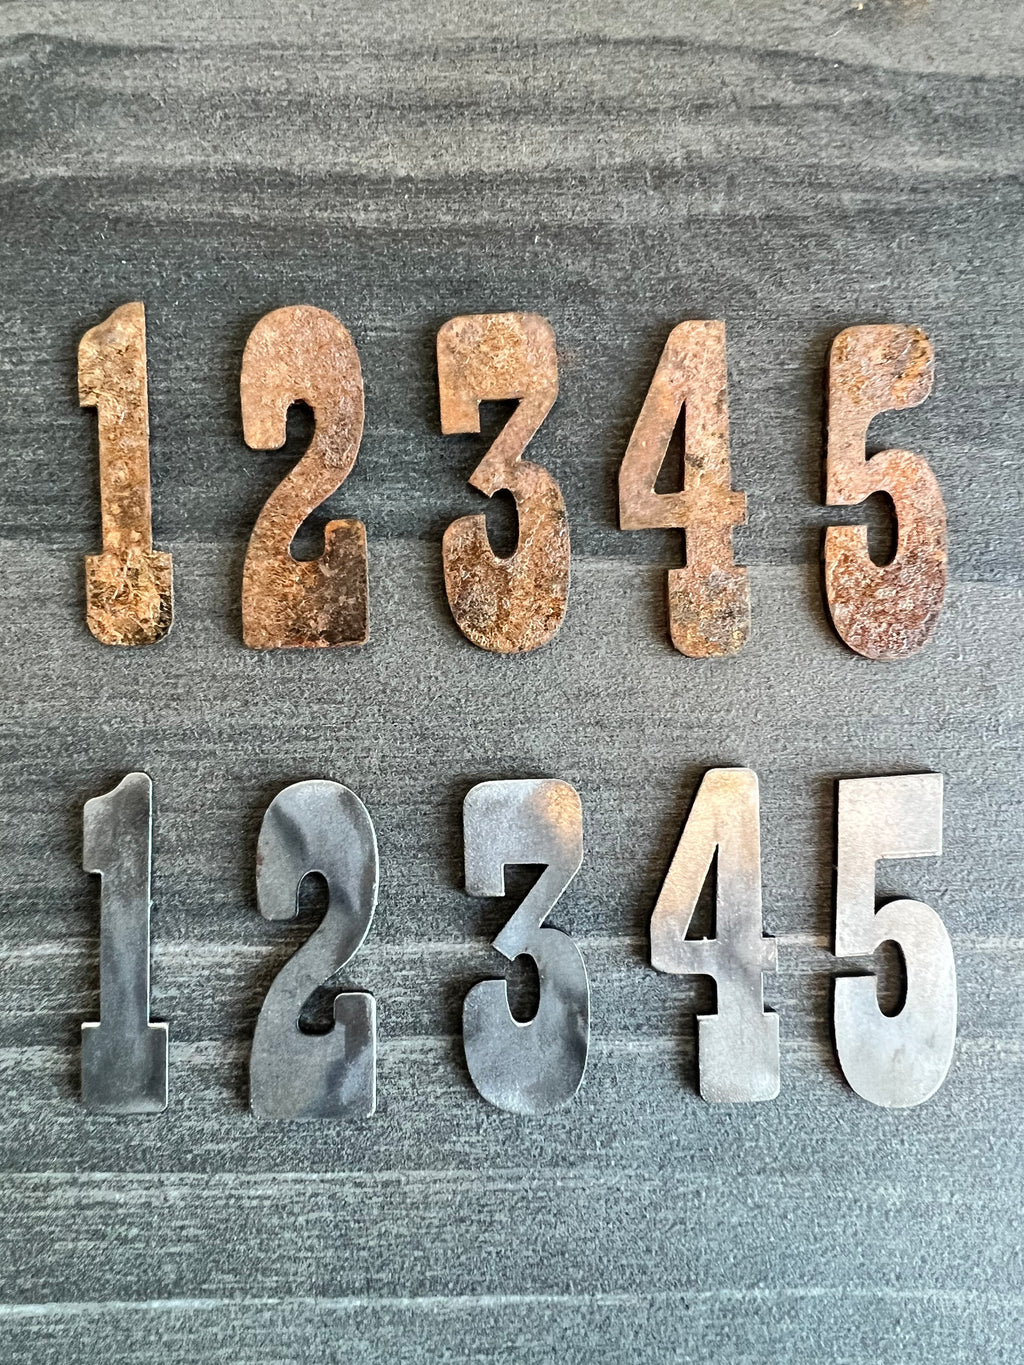 12 Inch Metal Numbers and Letters- Rusty or Natural Steel